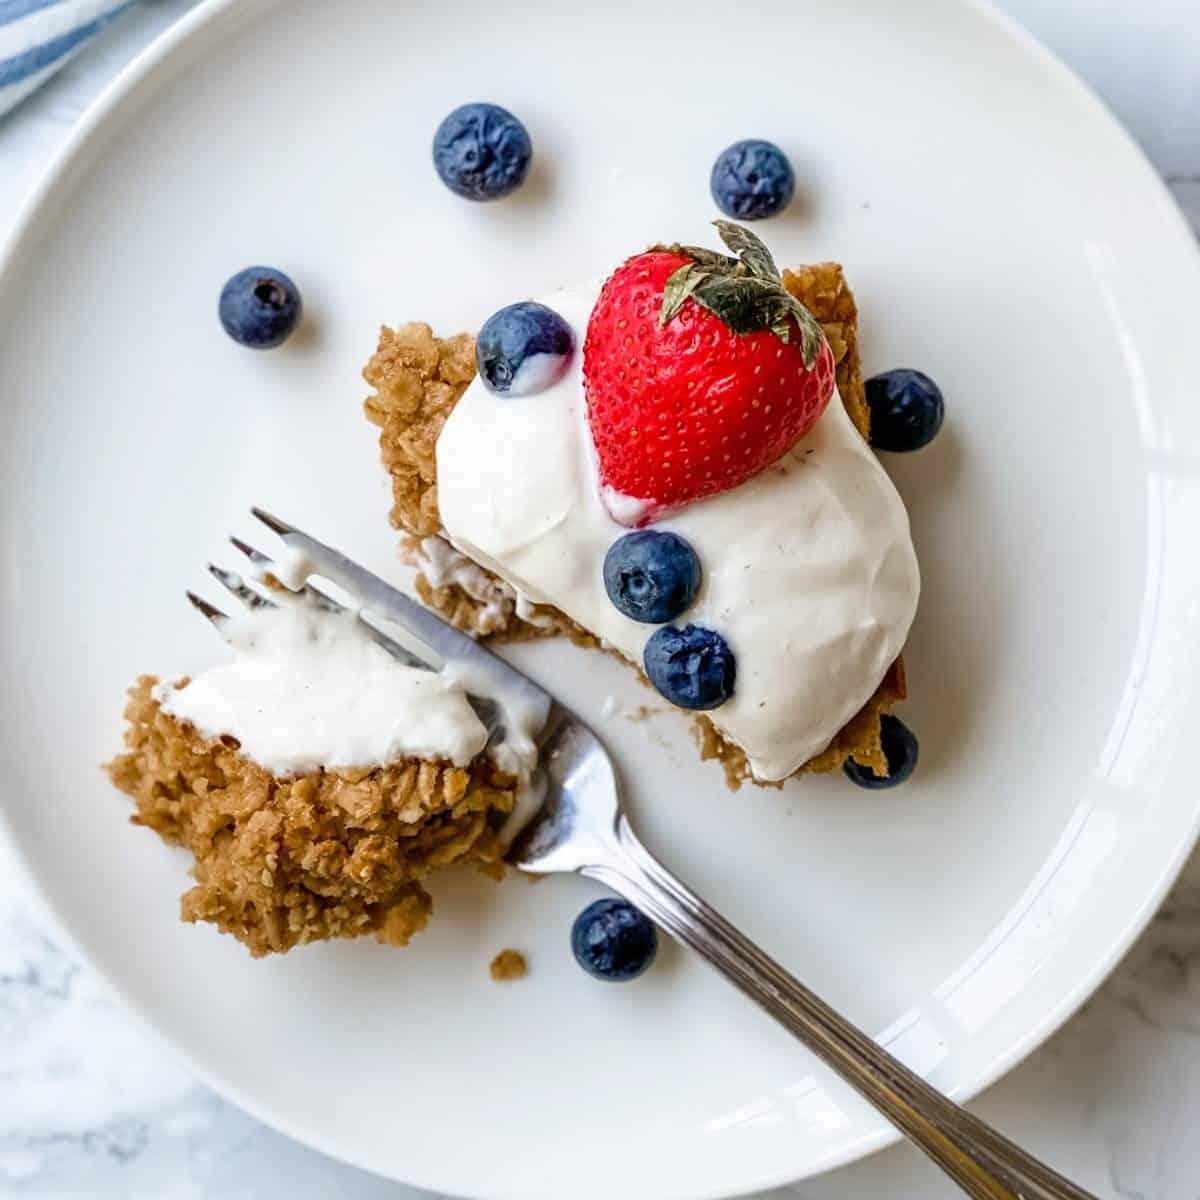 Delicious baked oatmeal recipe with yogurt and fruit.